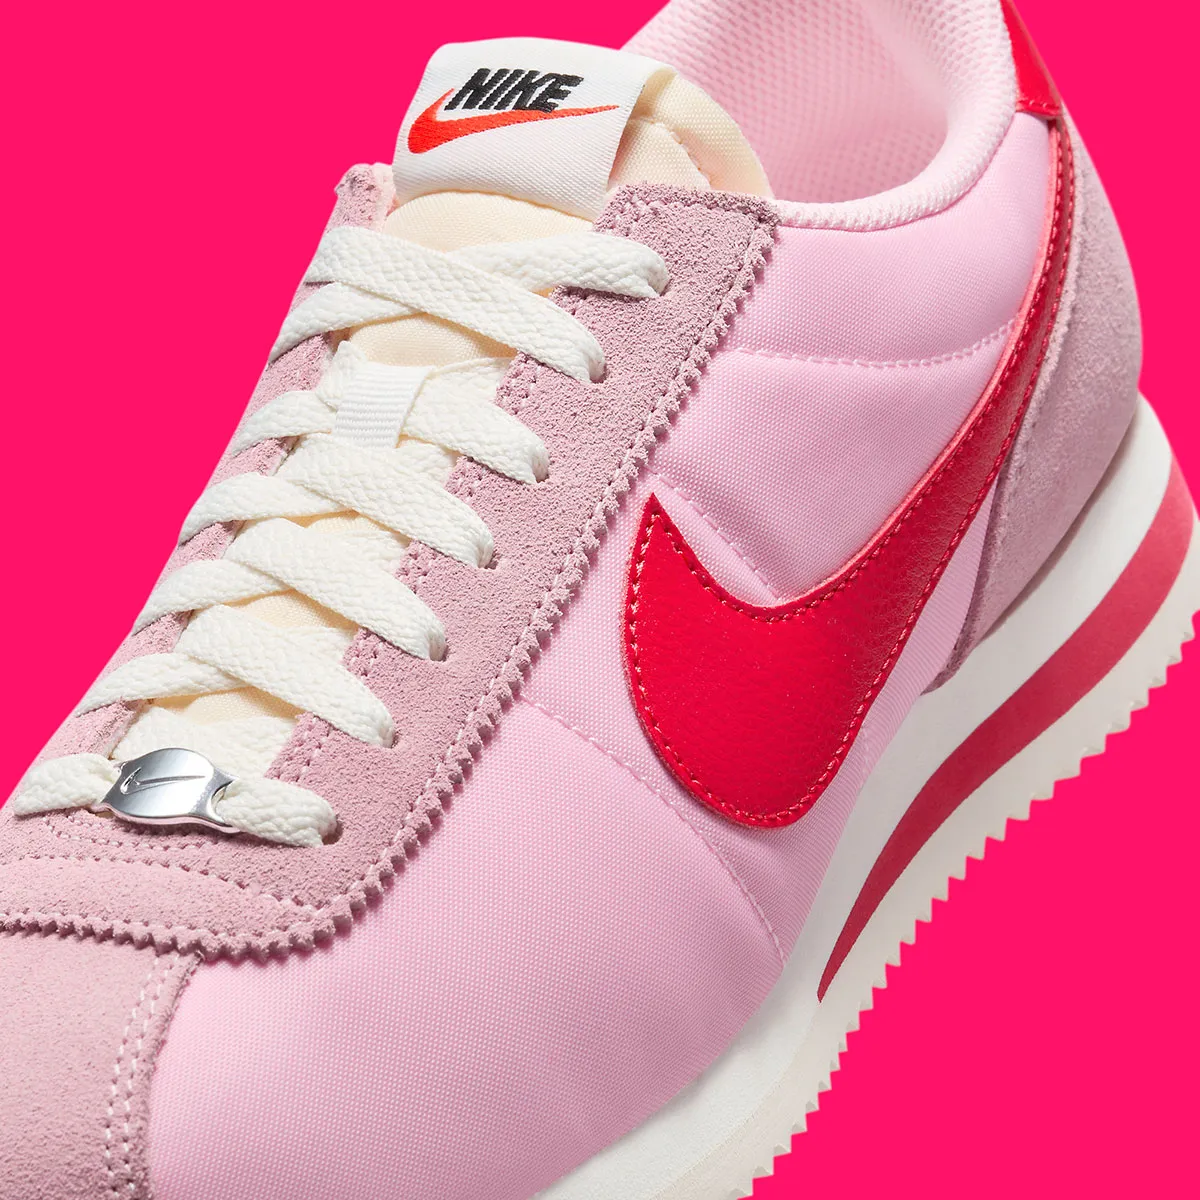 Blossom in Style: Nike Cortez "Medium Soft Pink" Makes a Statement